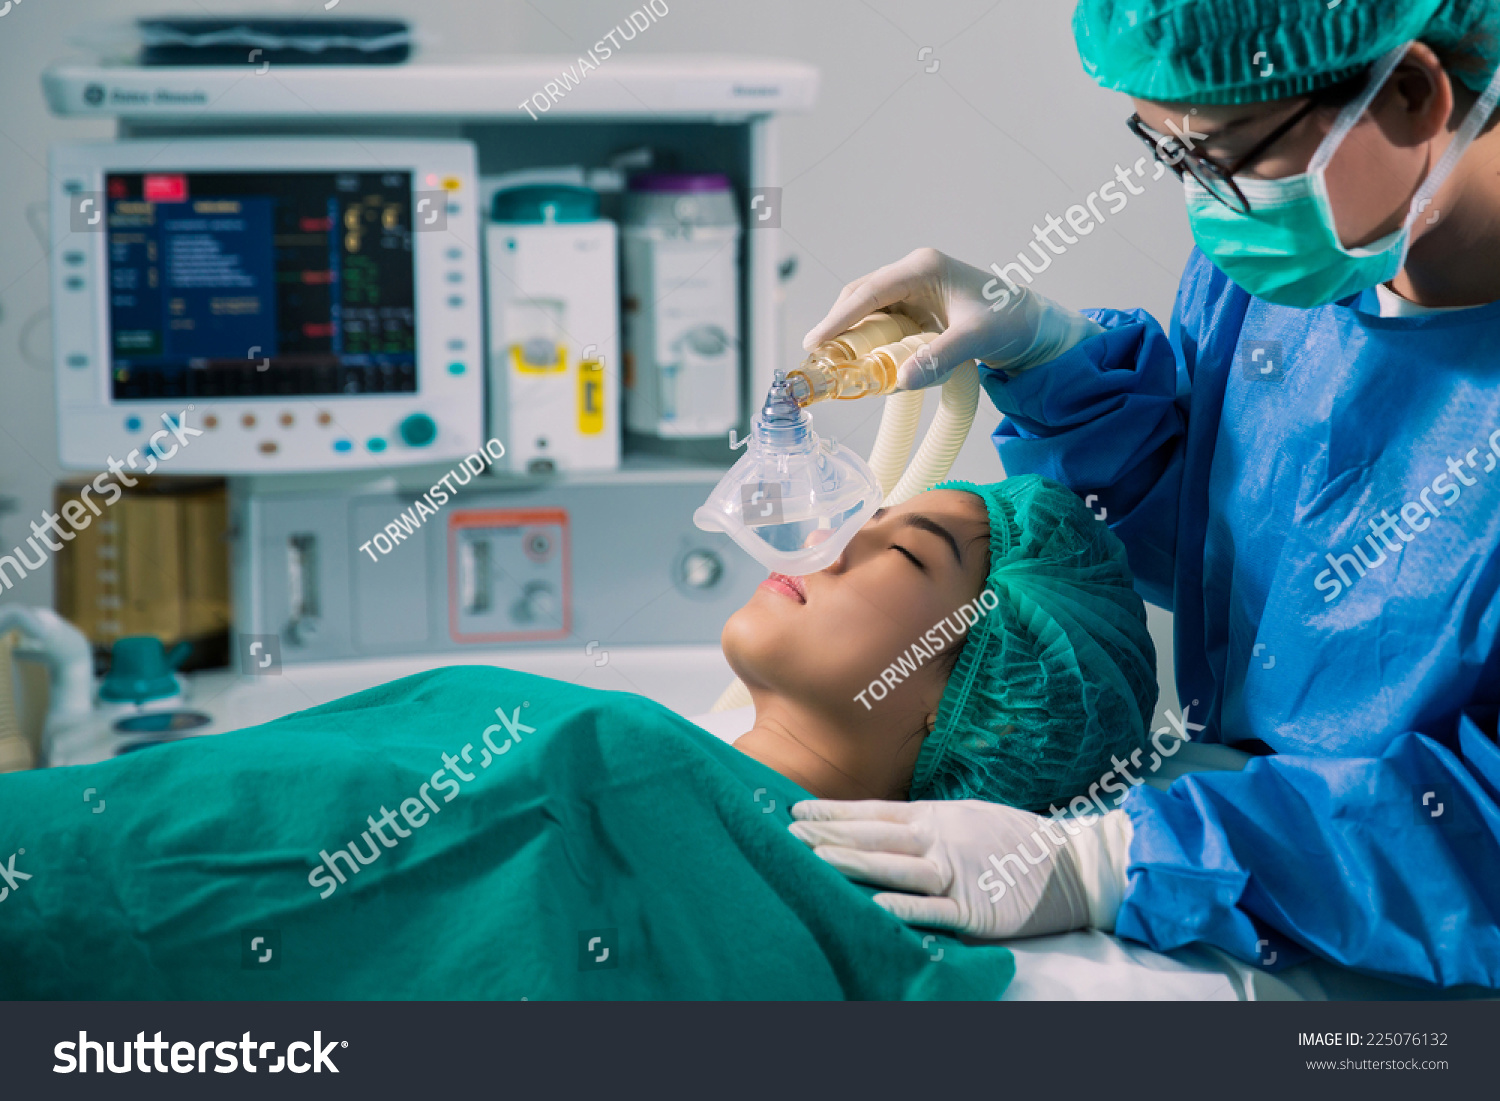 Doctors were anesthetized Women who are surgical patients and the doctor put a mask #225076132